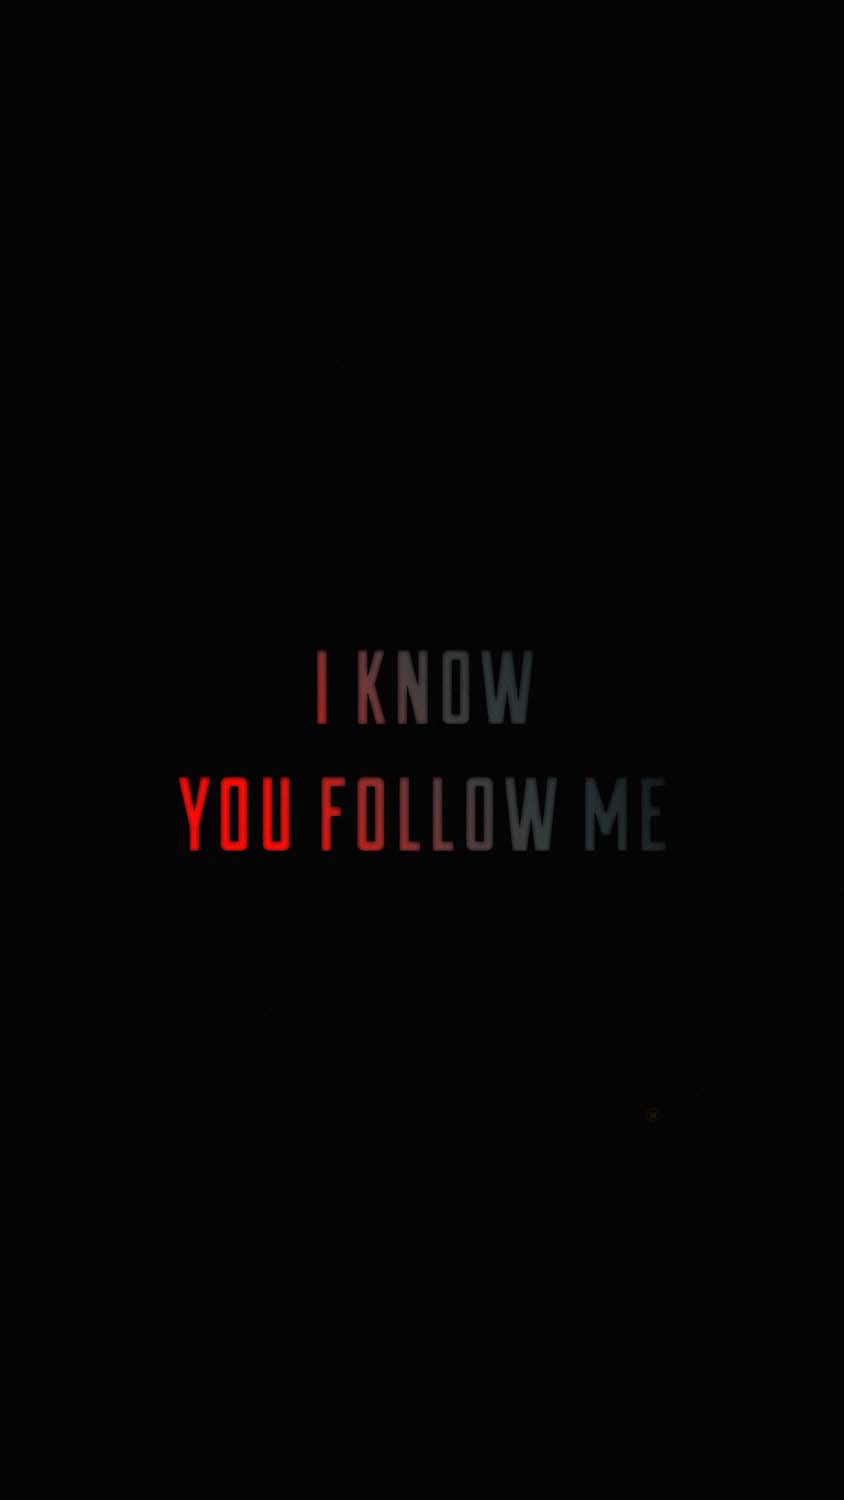 I Know You Follow Me iPhone Wallpaper HD